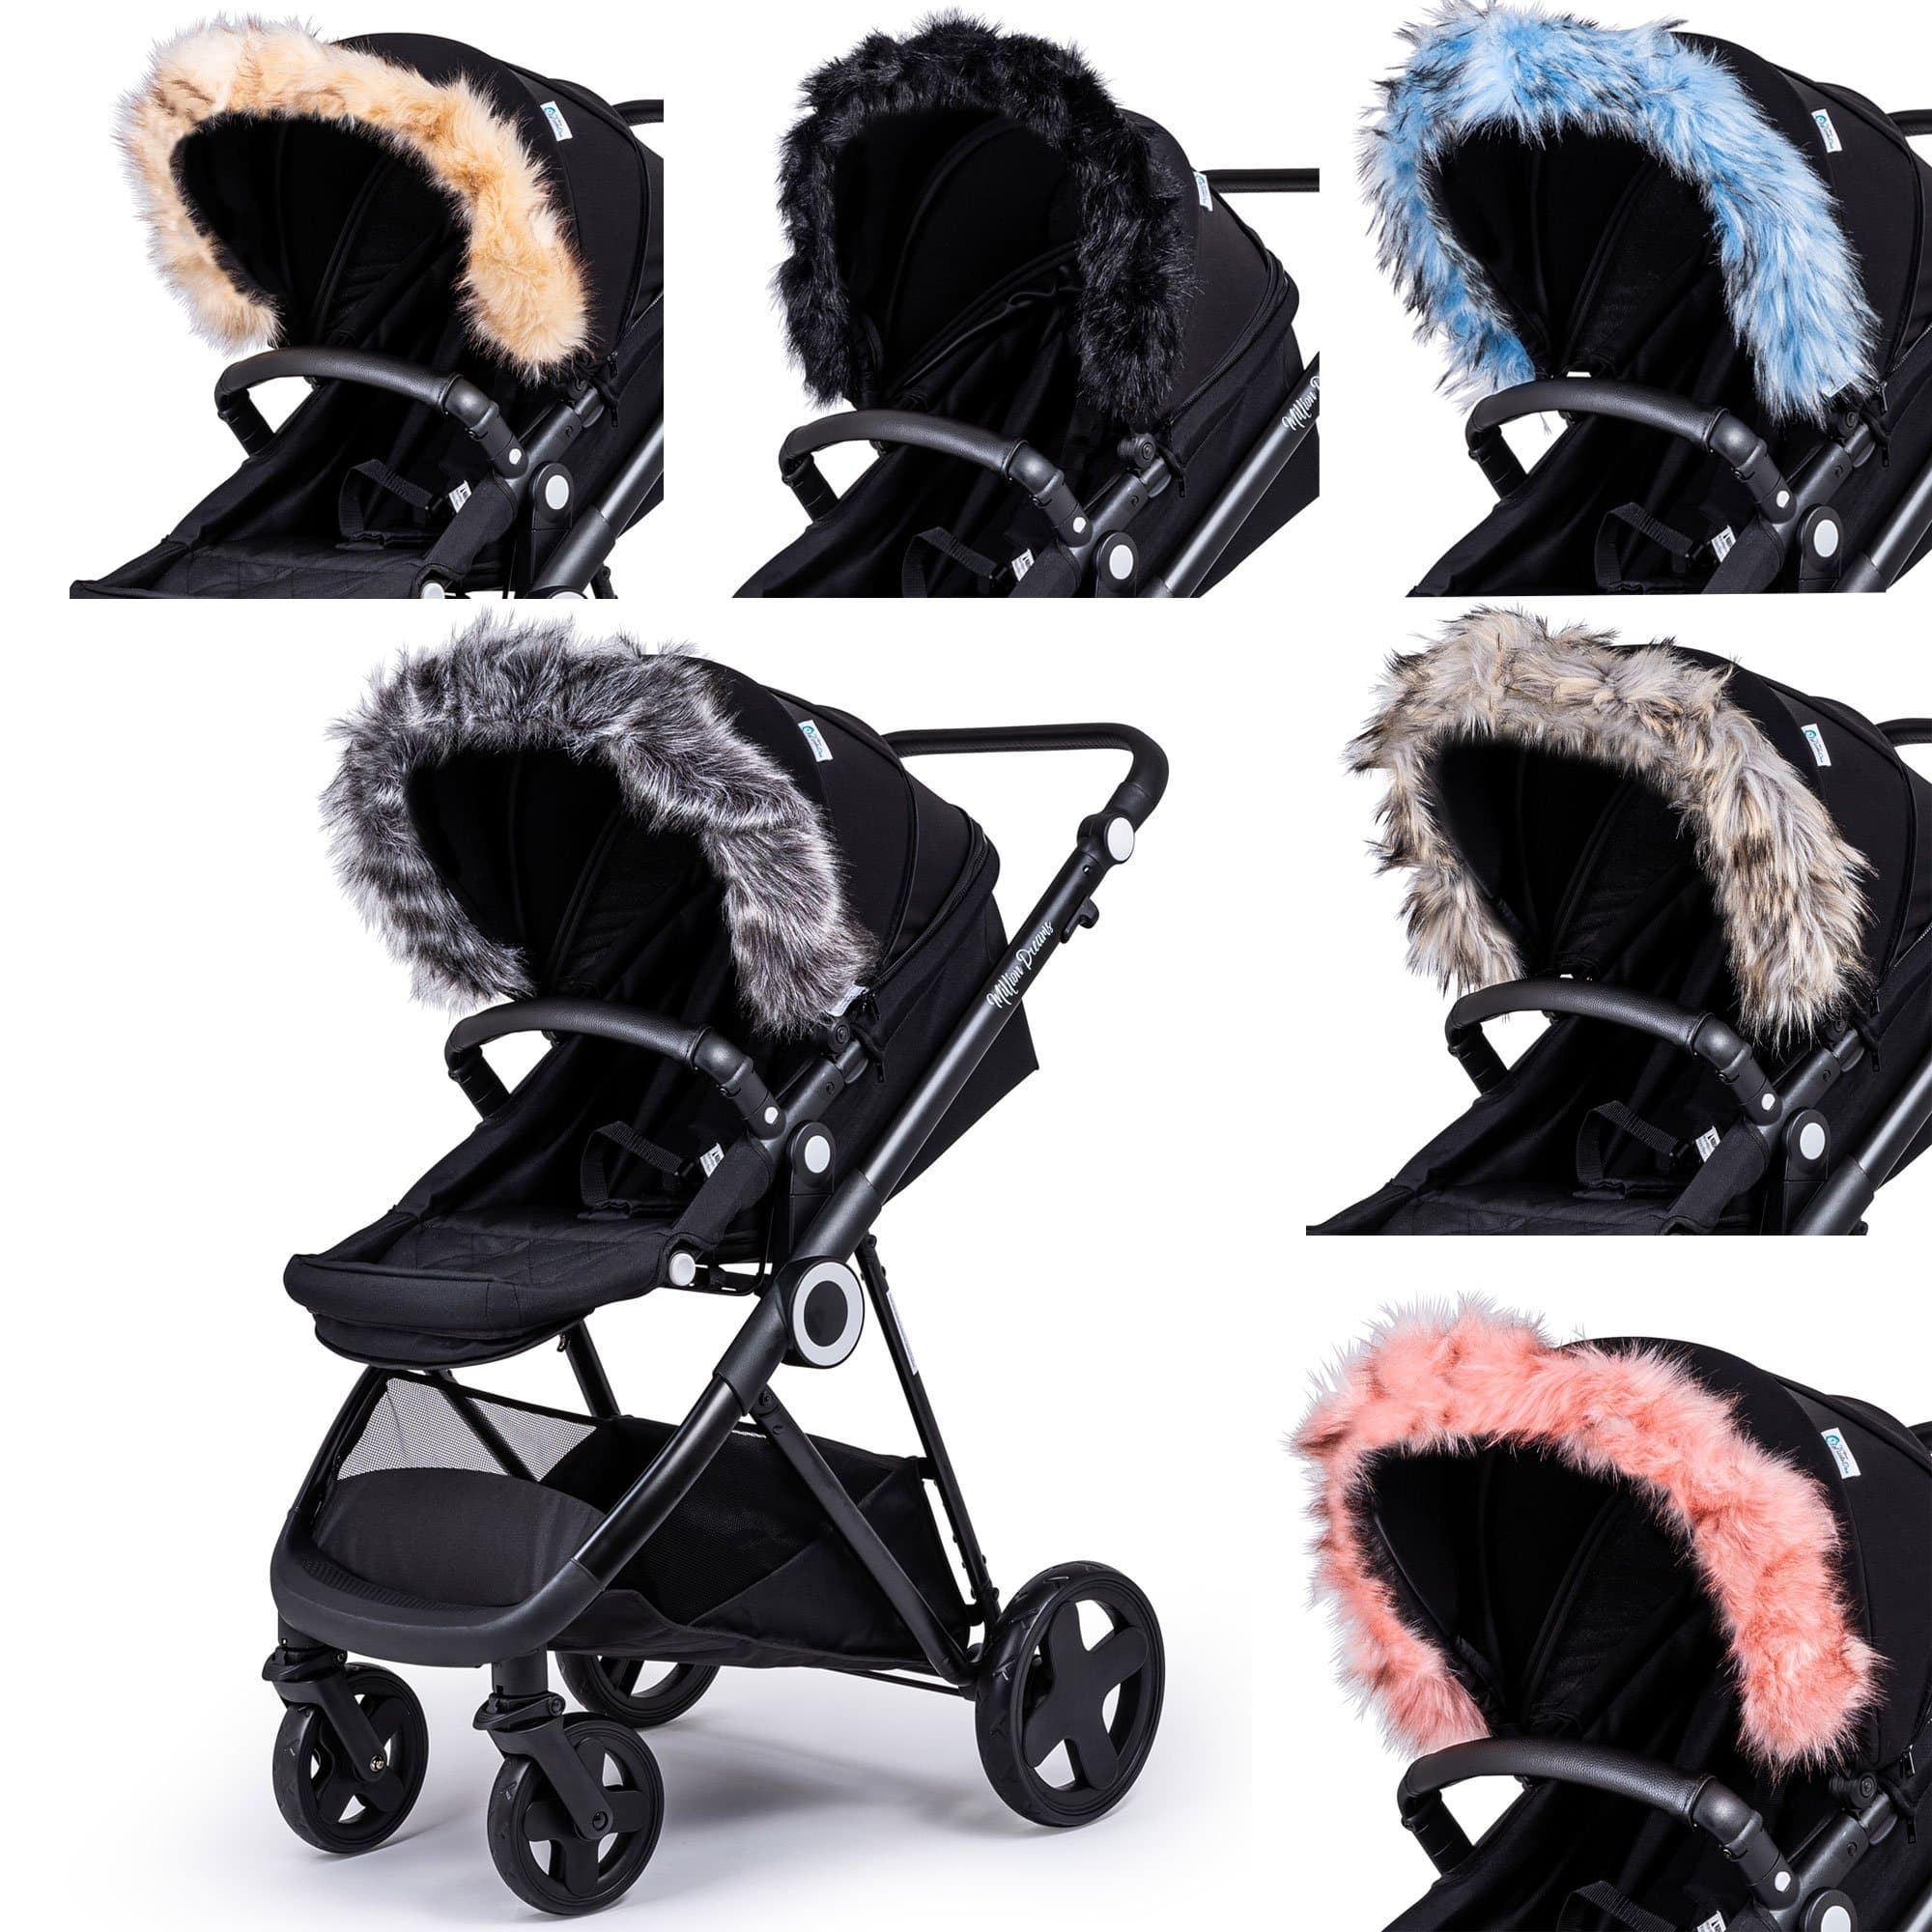 Pram Fur Hood Trim Attachment for Pushchair Compatible with Zeta - For Your Little One